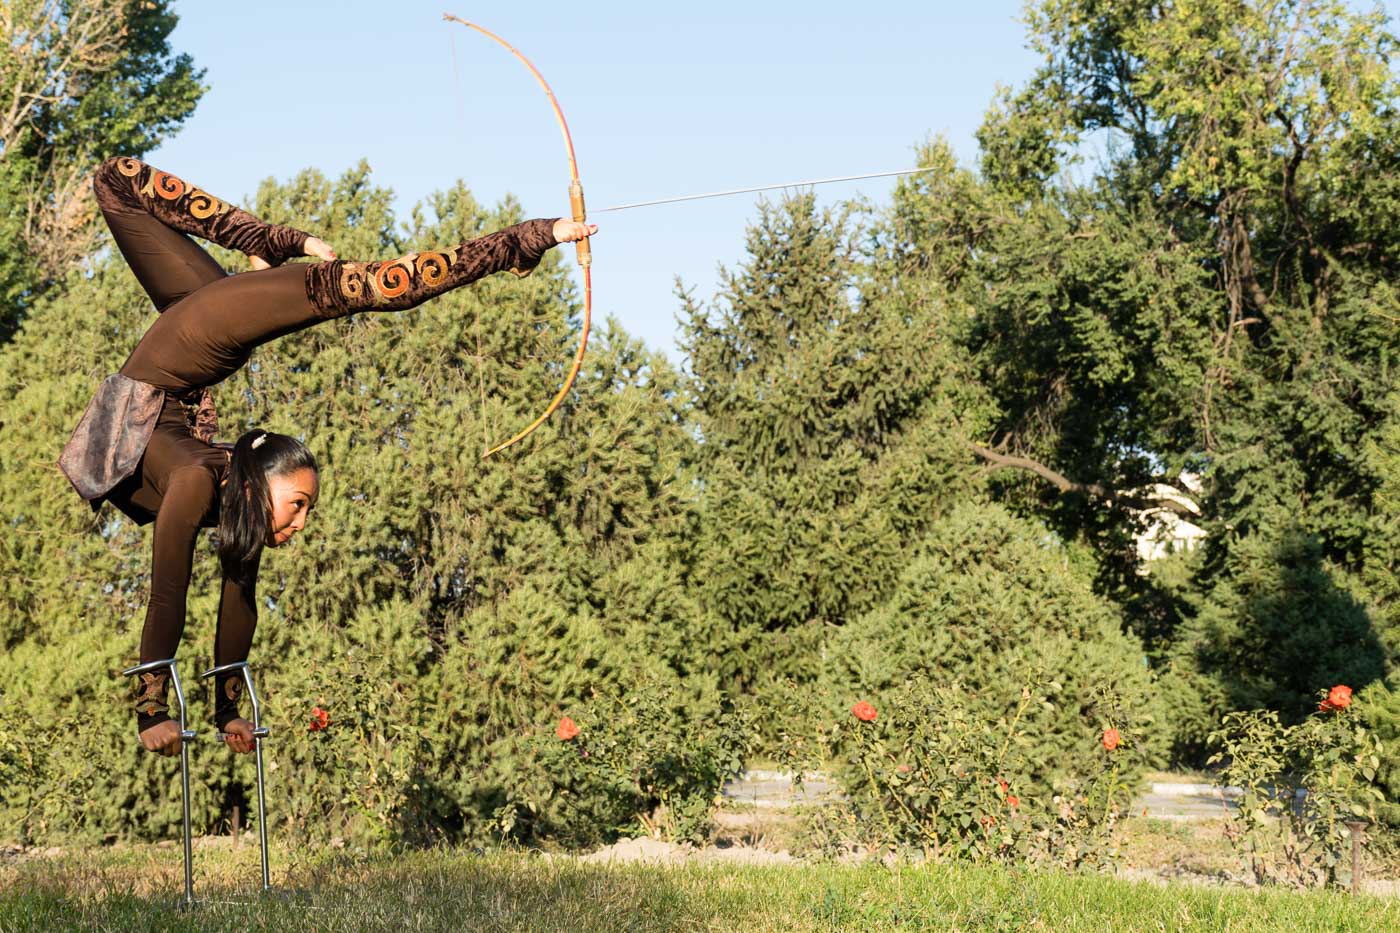 Woman in Kyrgyzstan throwing an arrow with a bow with her feet while handstand